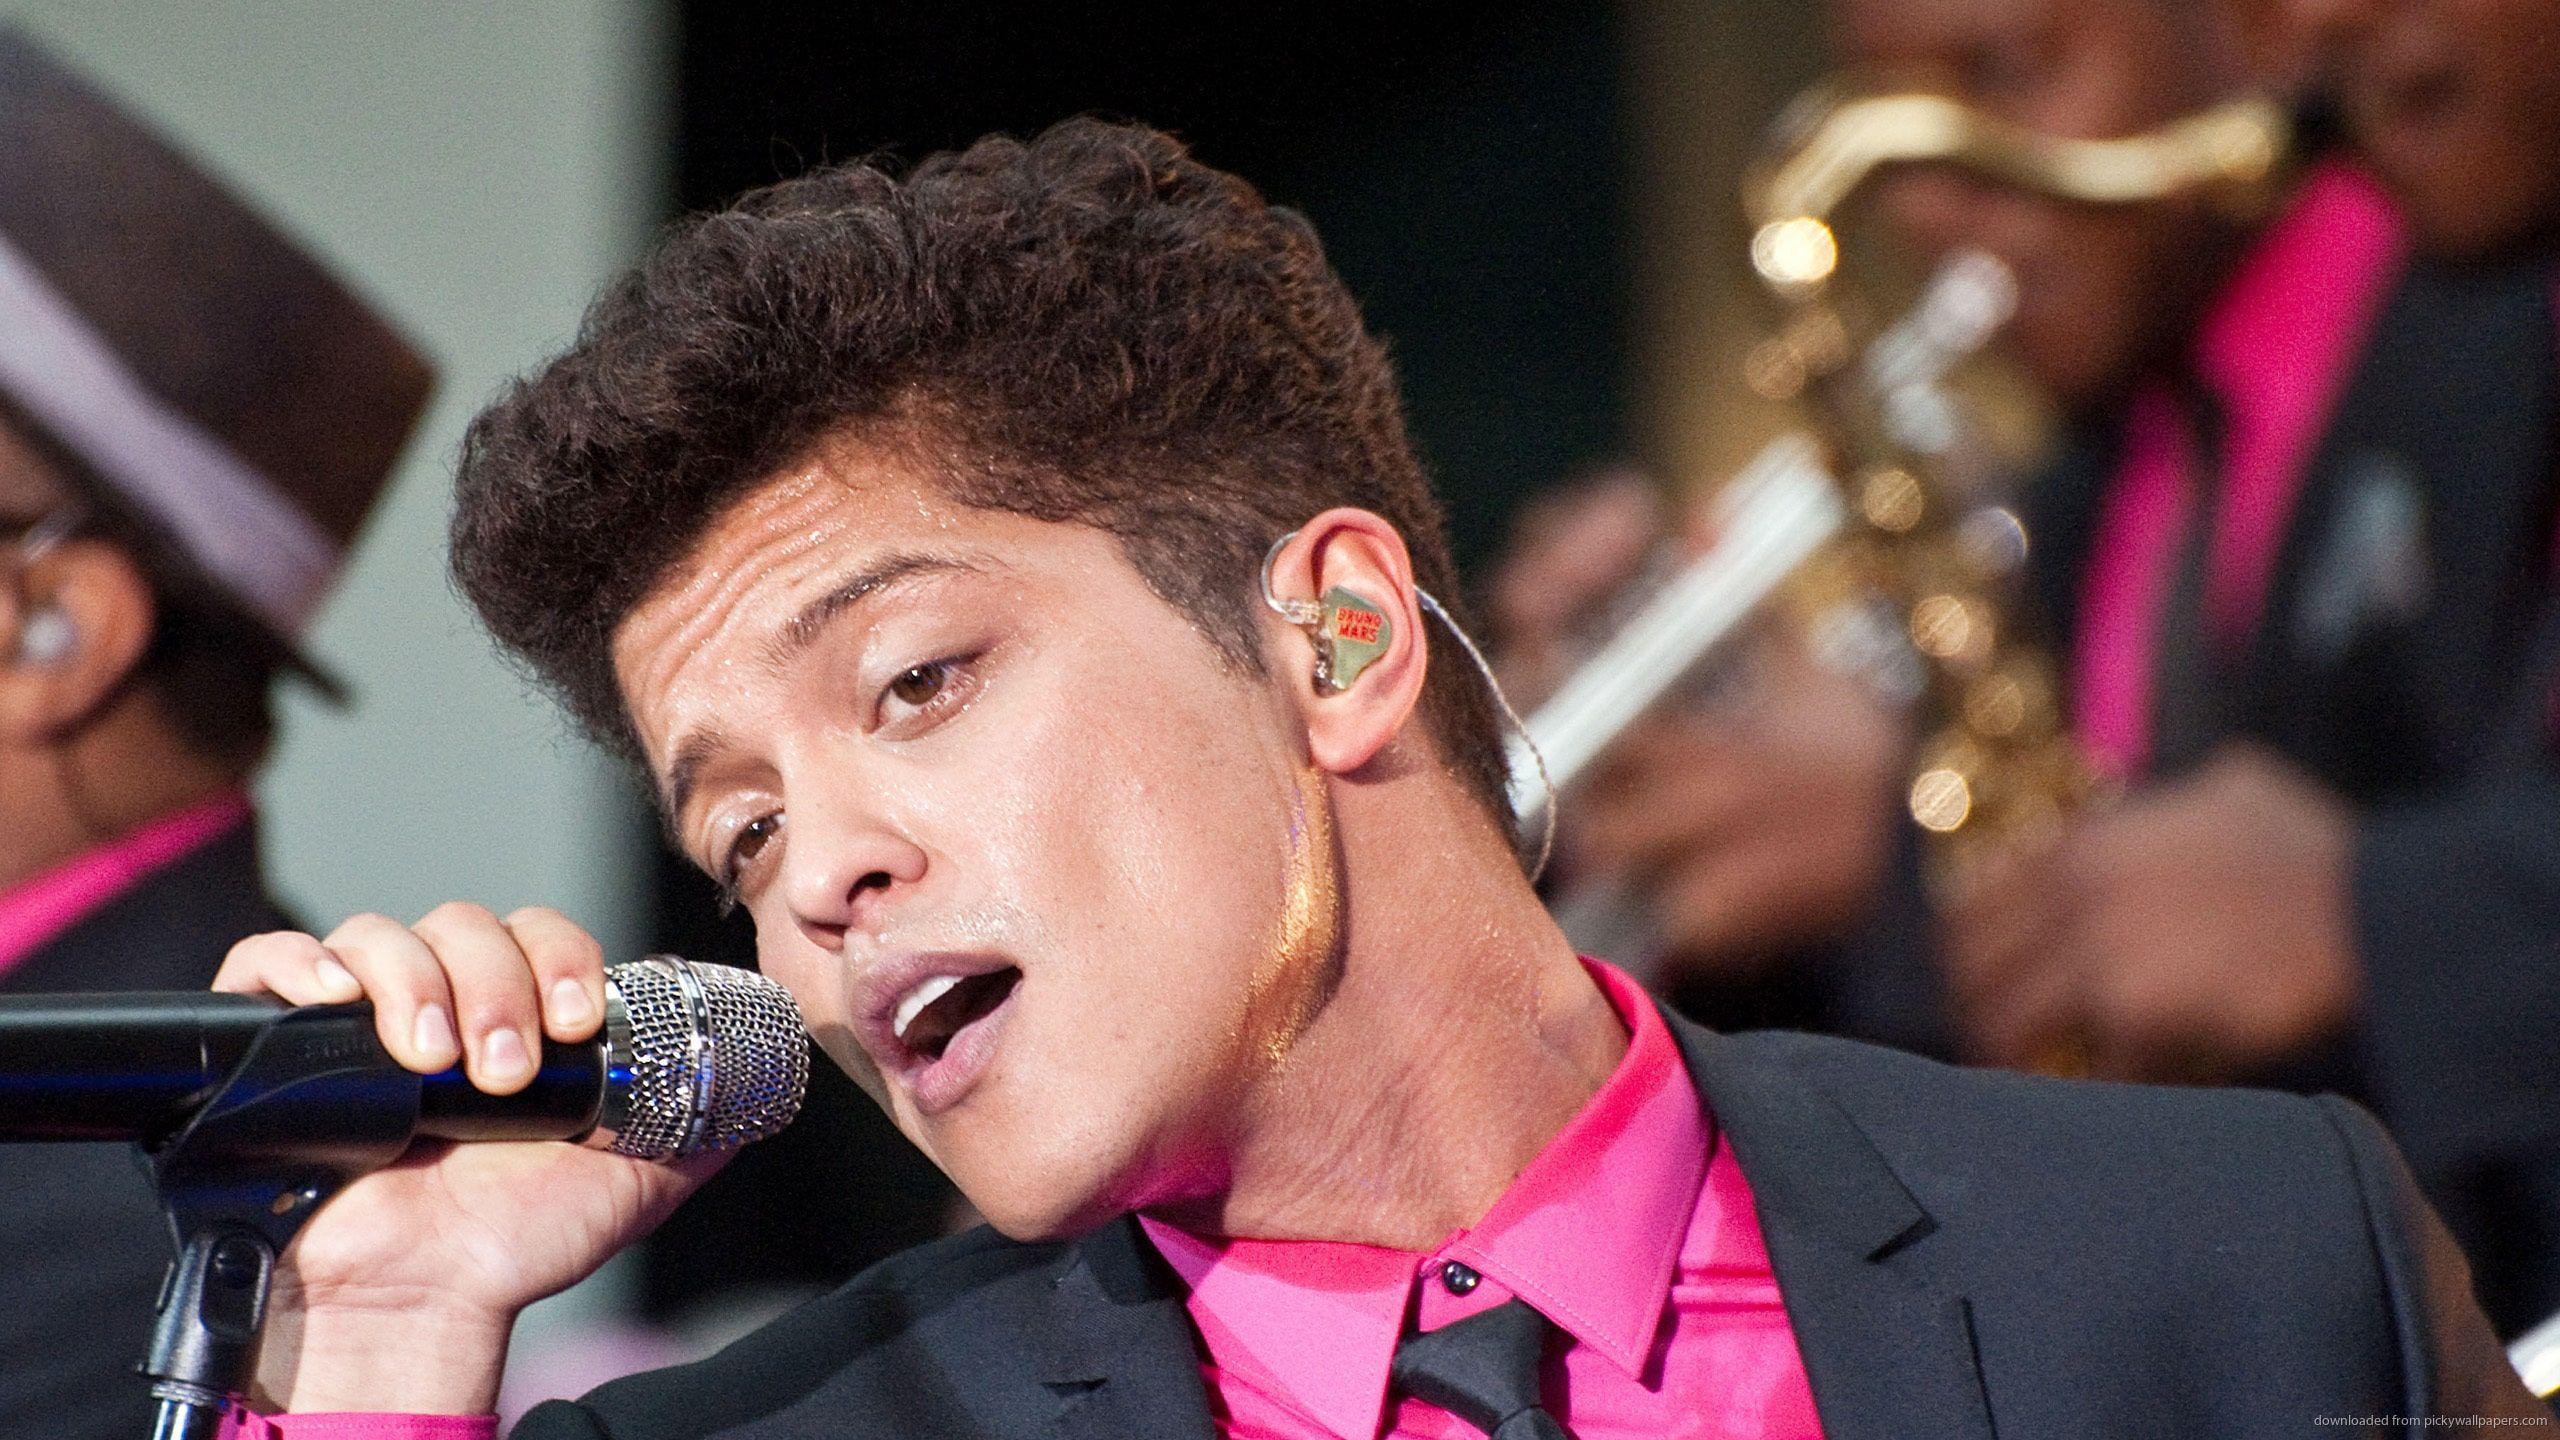 Top Bruno Mars Songs To Listen To In 2018 - (Updated 2 Hours Ago)